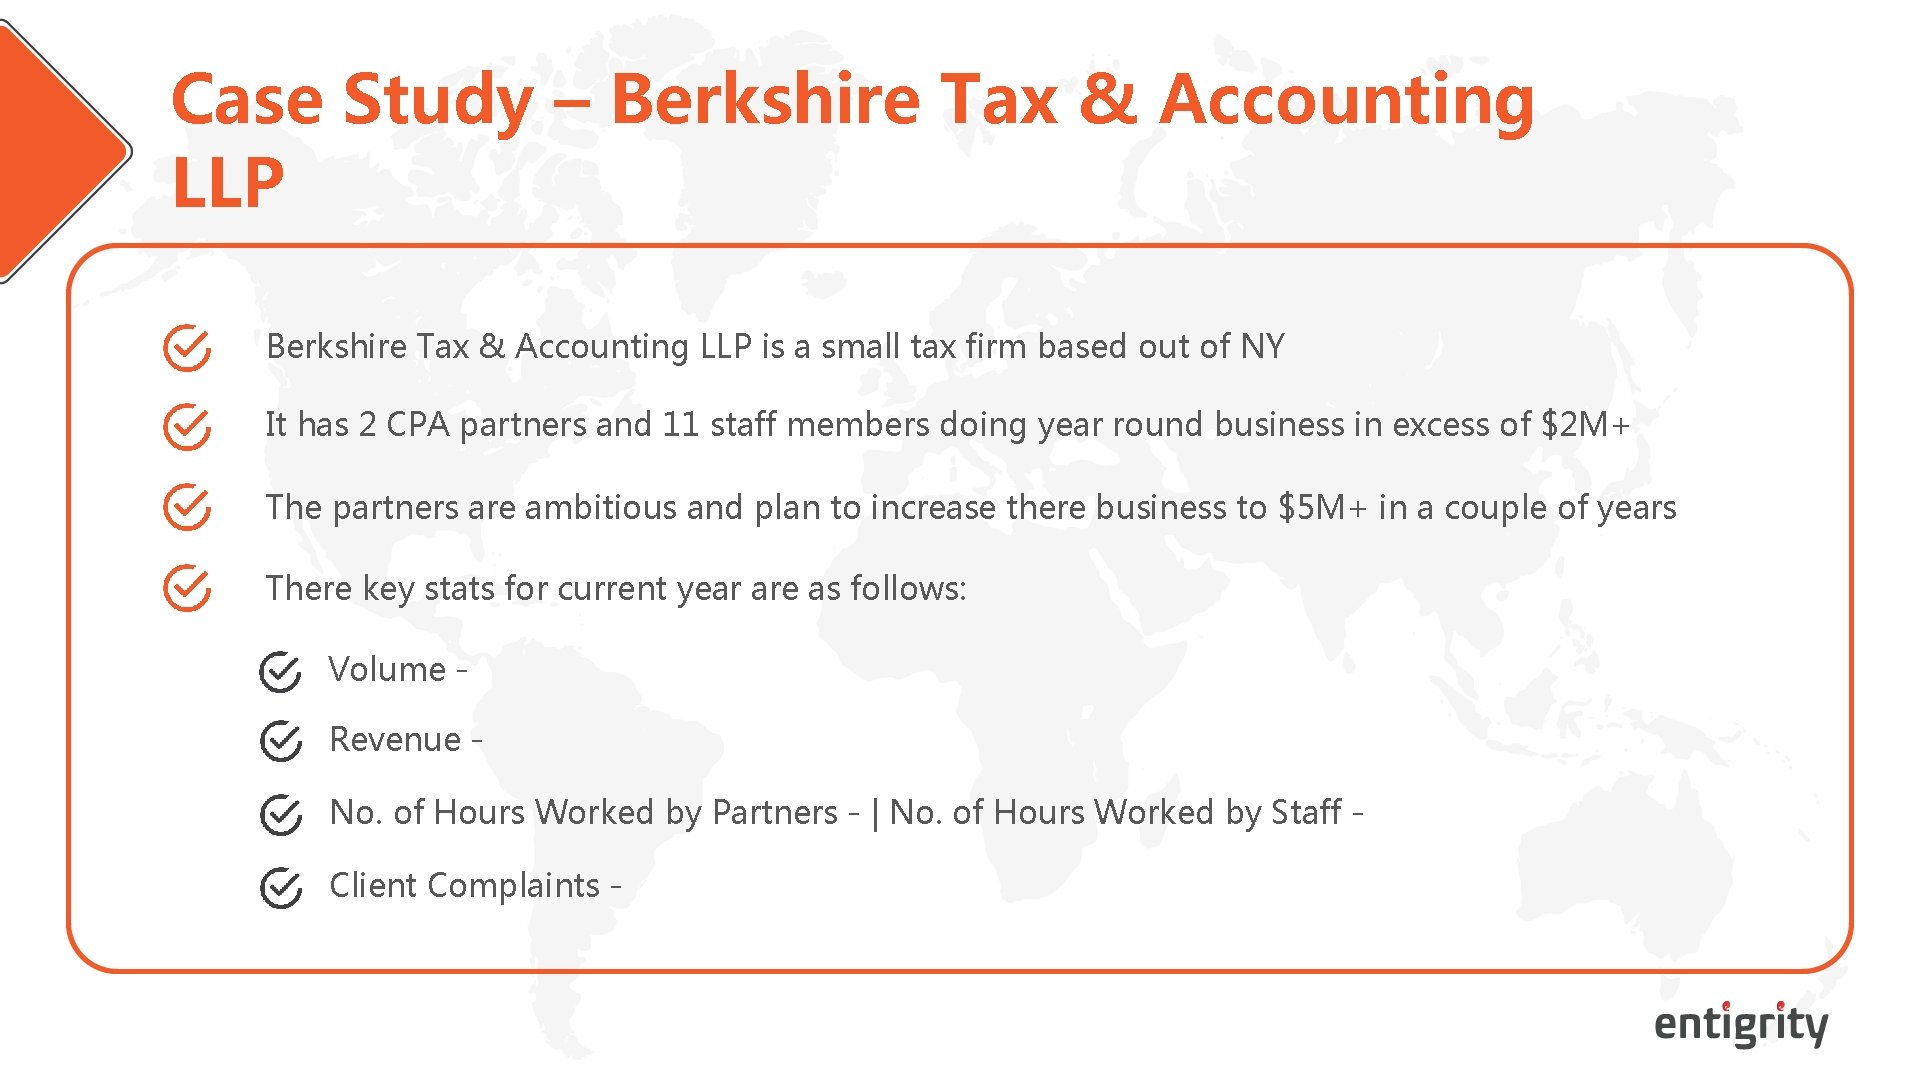 Case Study – Berkshire Tax & Accounting LLP is a small tax firm based